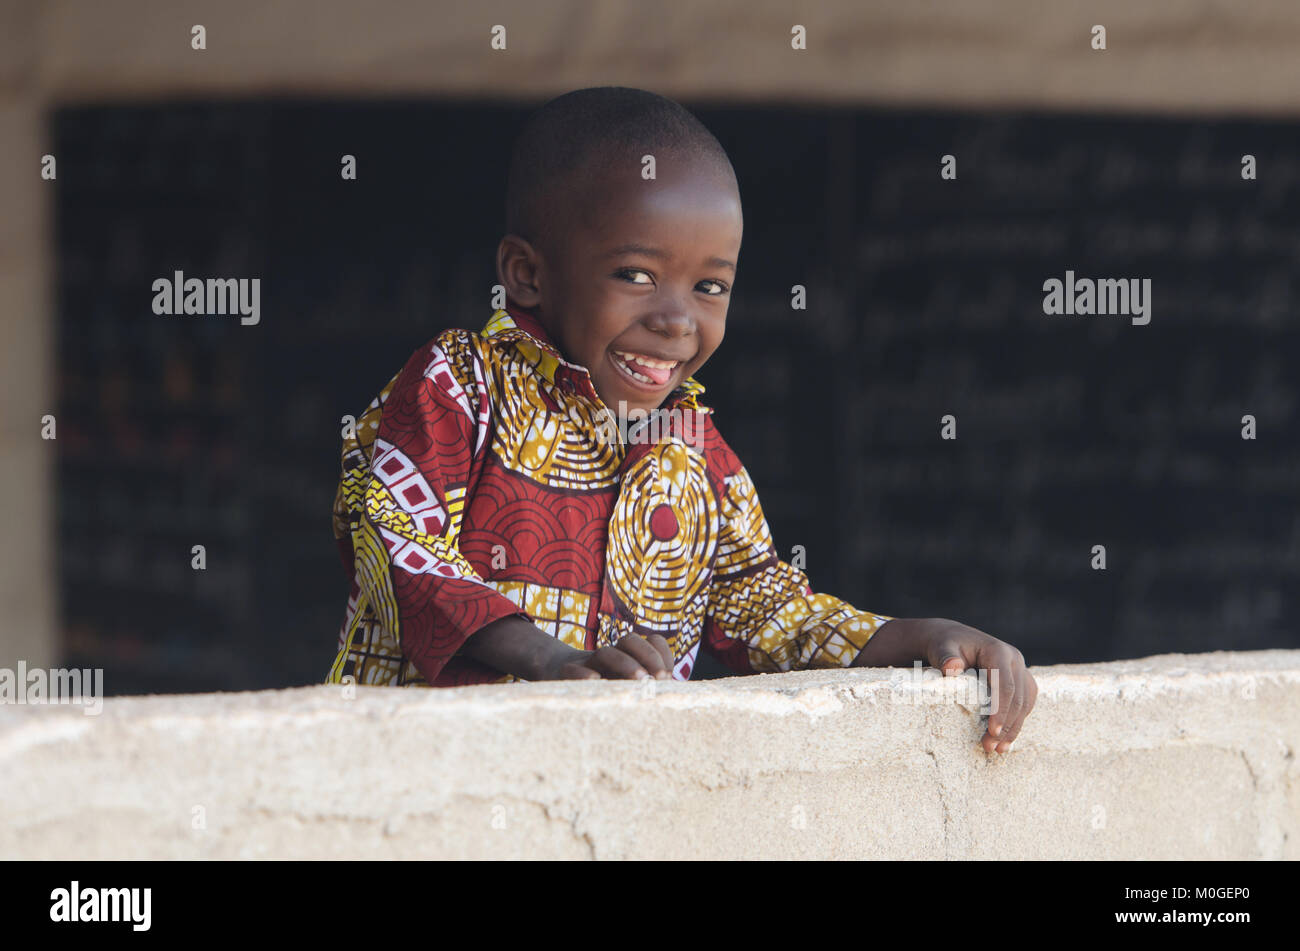 Gorgeous African Child Smiles at School Banner Background Stock Photo